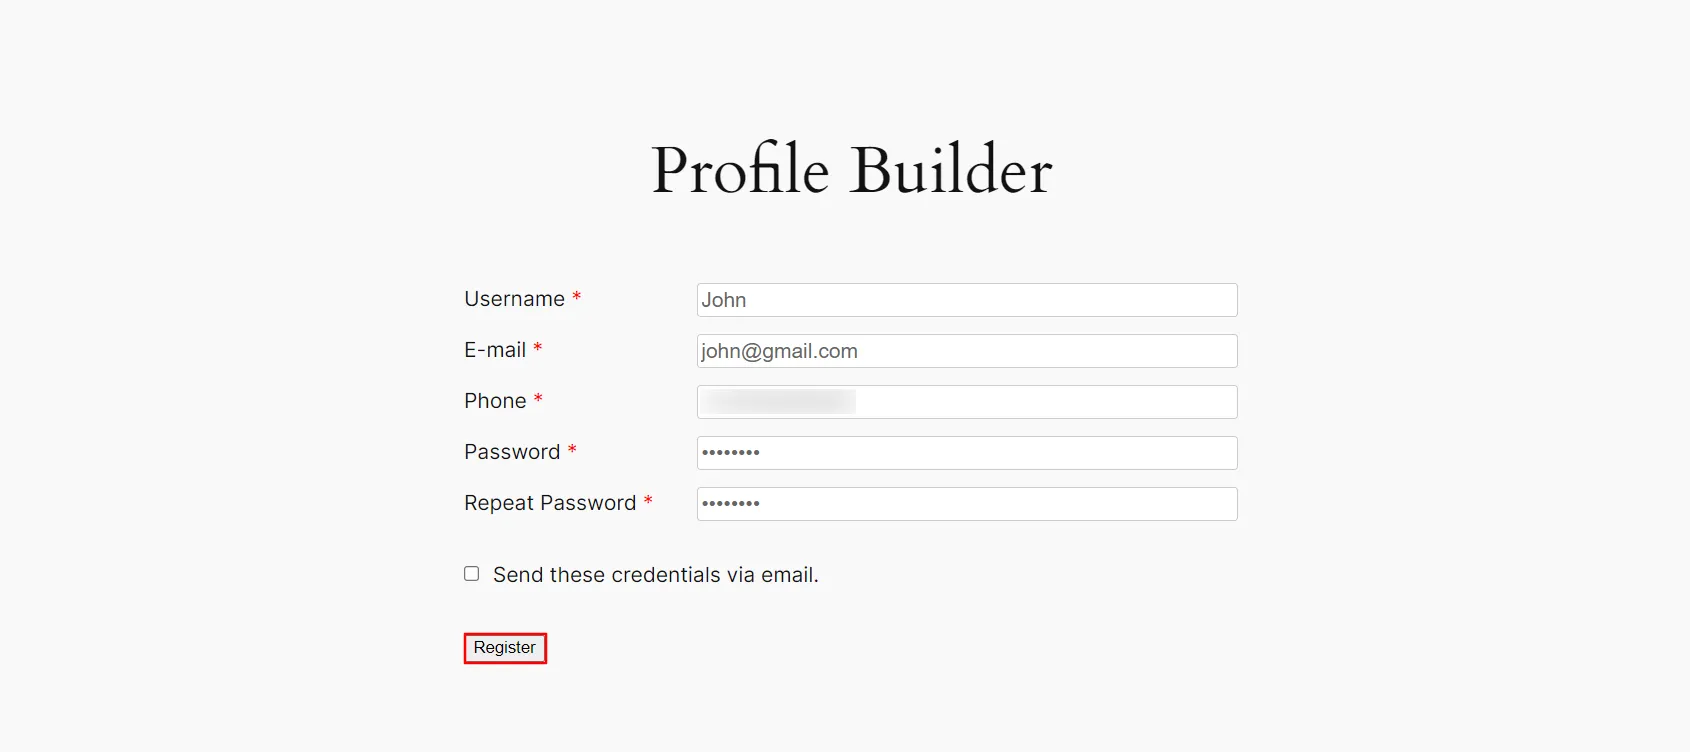 Profile Builder - fill required fields